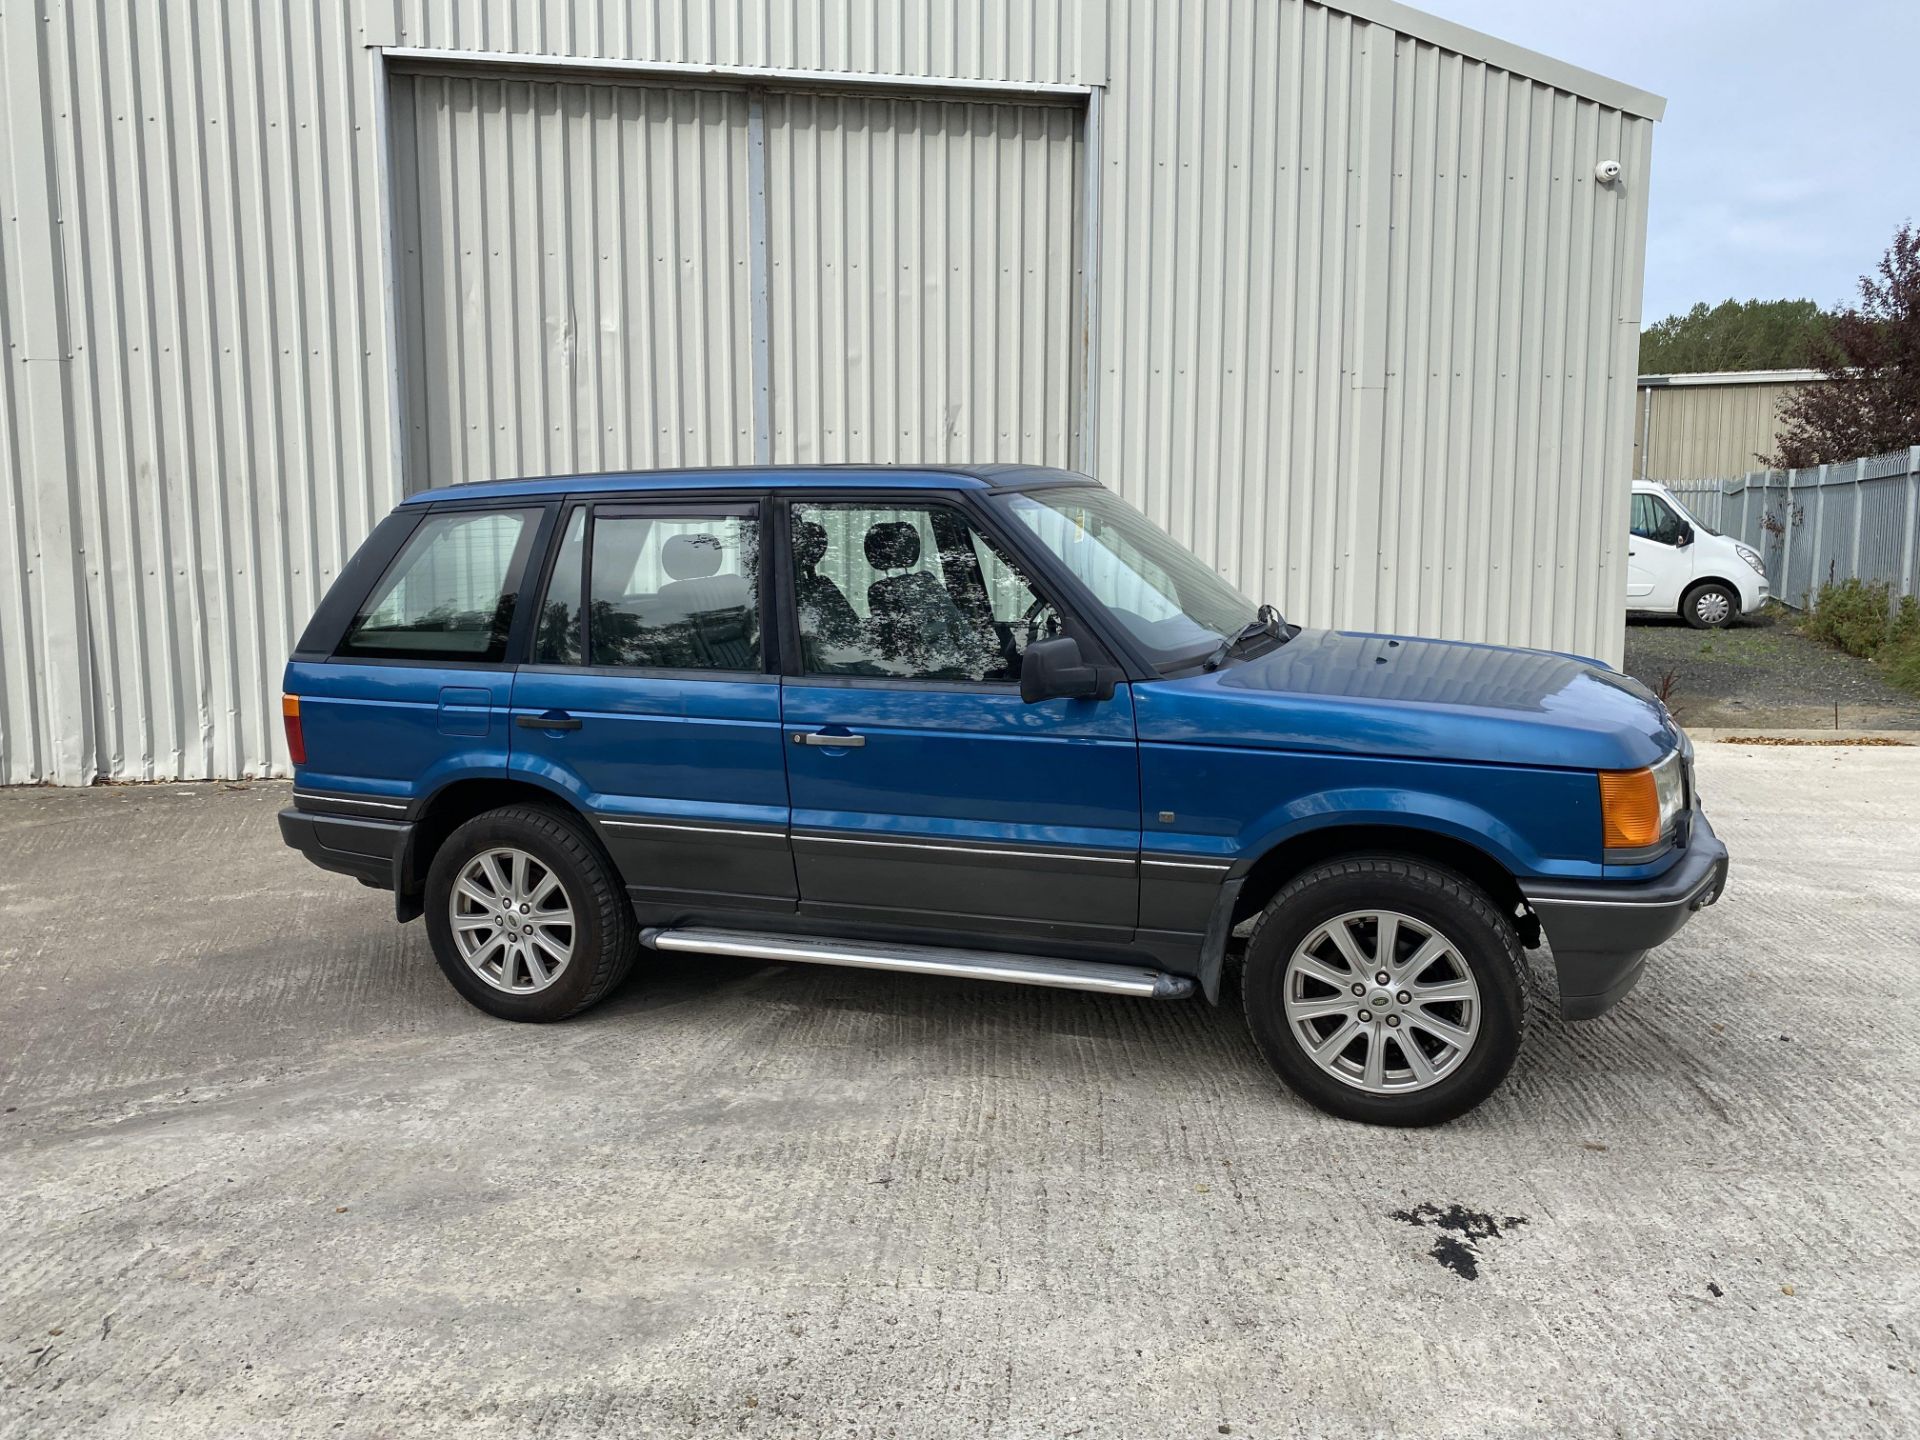 Land Rover Range Rover P38 - Image 2 of 30